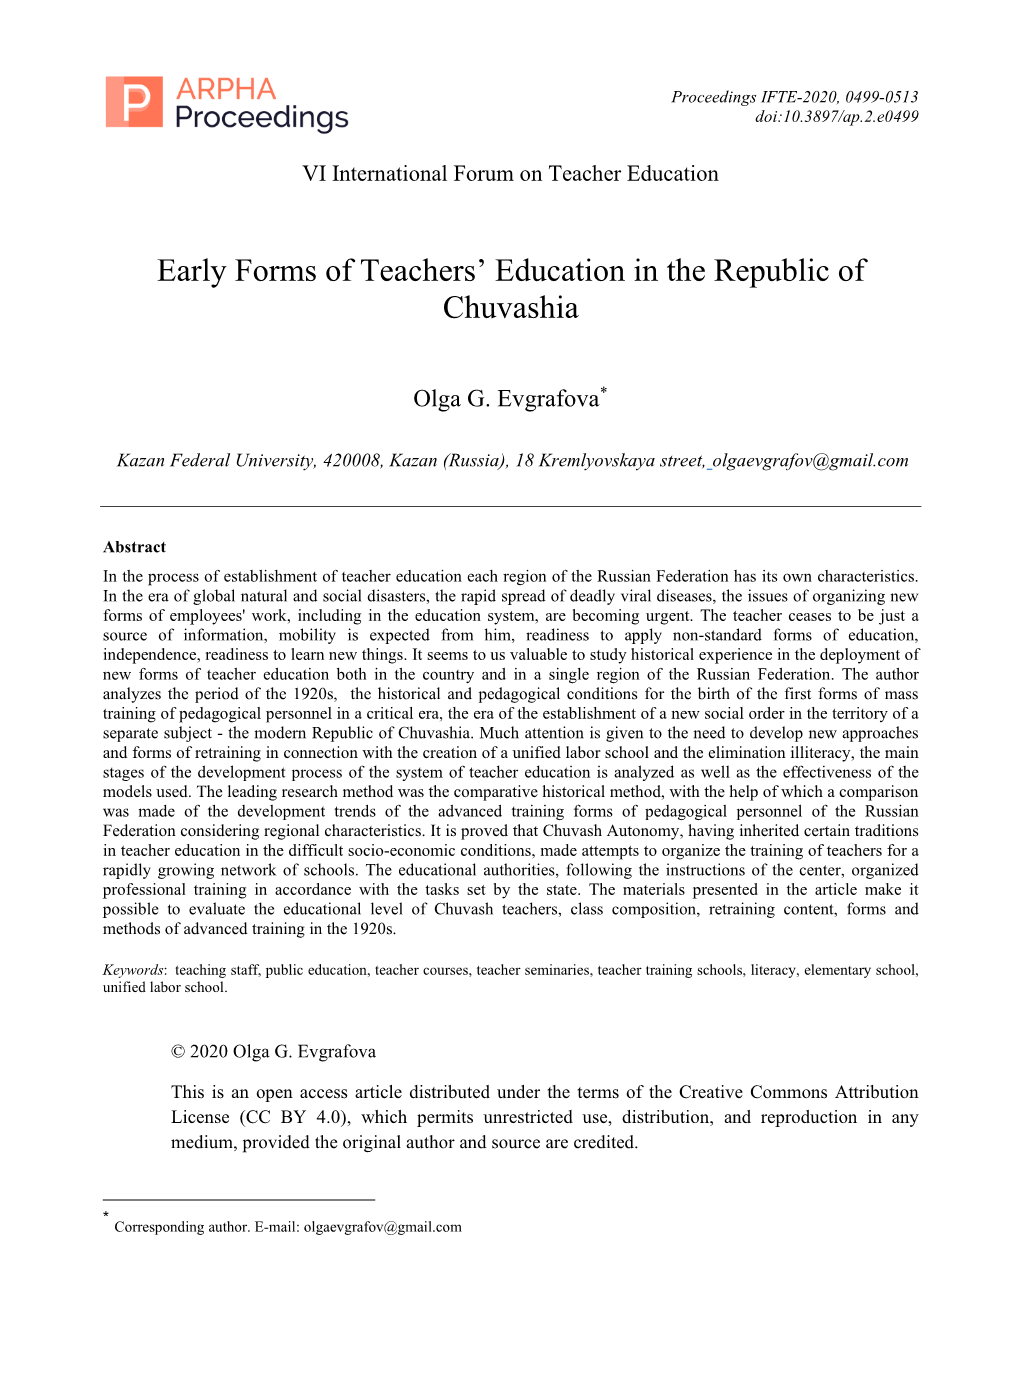 Early Forms of Teachers' Education in the Republic of Chuvashia